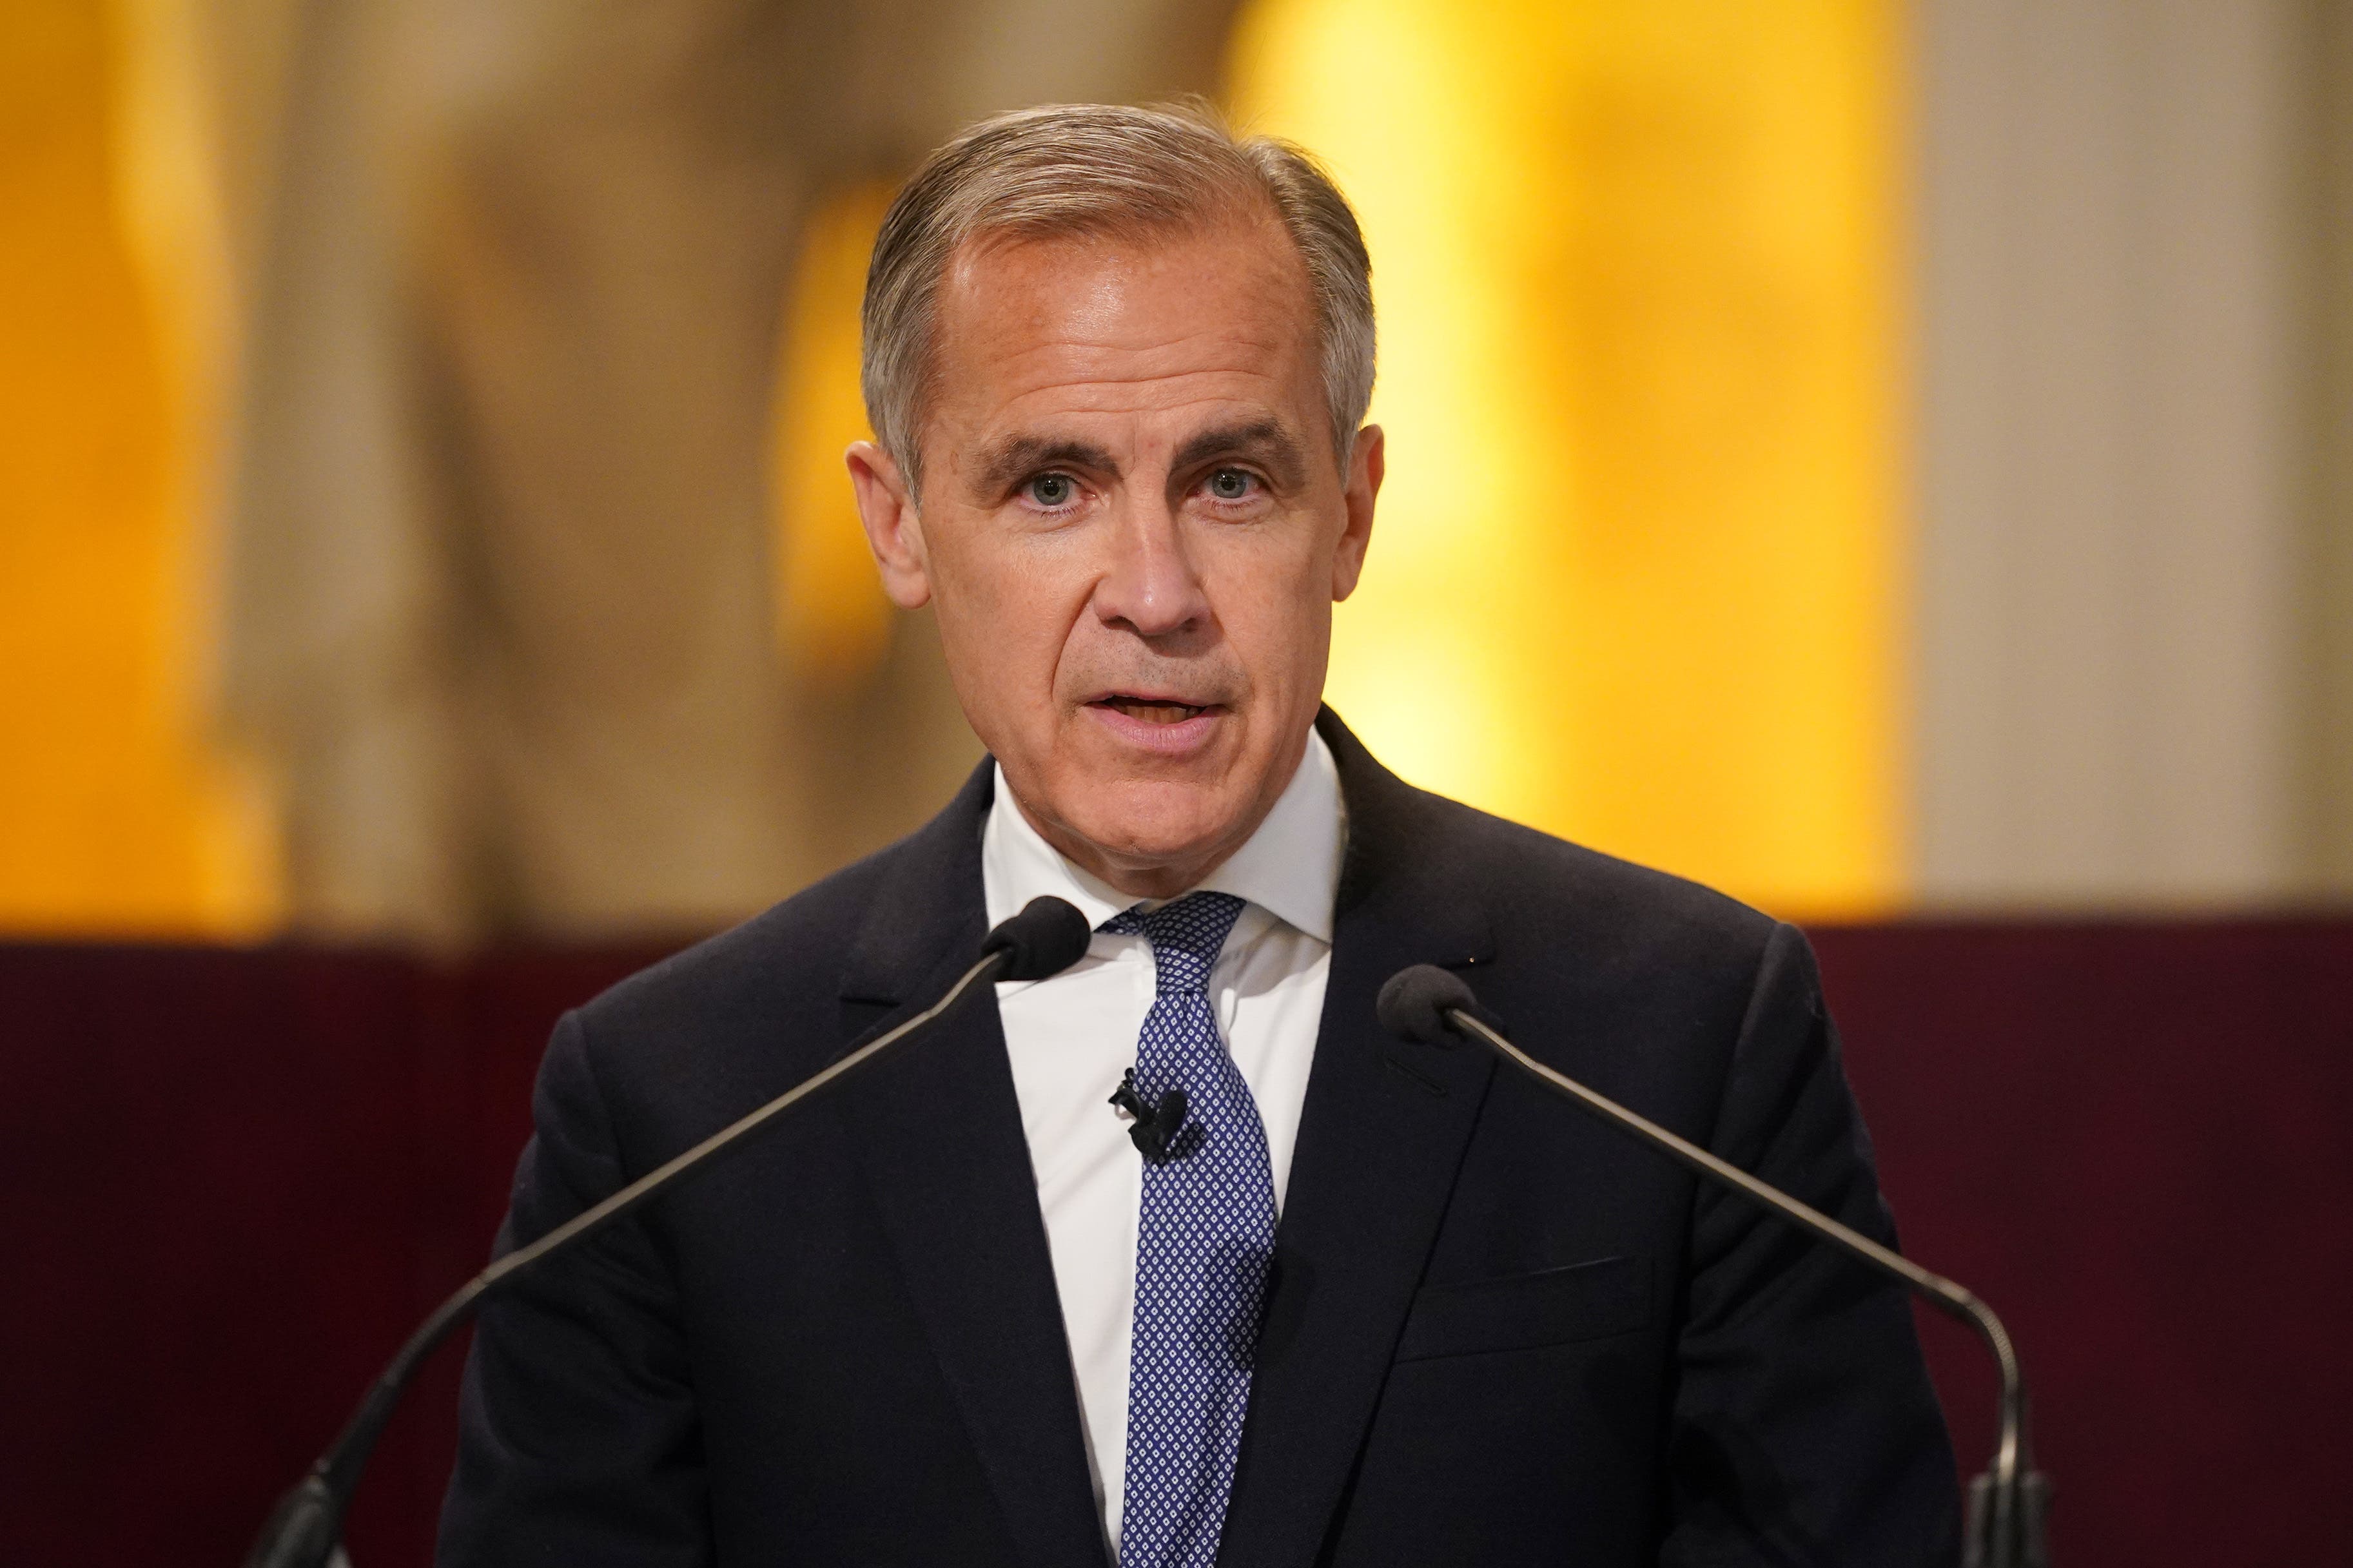 Former Bank of England boss Mark Carney has been appointed to head up a new board of directors at media financial services group Bloomberg as part of a management overhaul at the firm (PA)